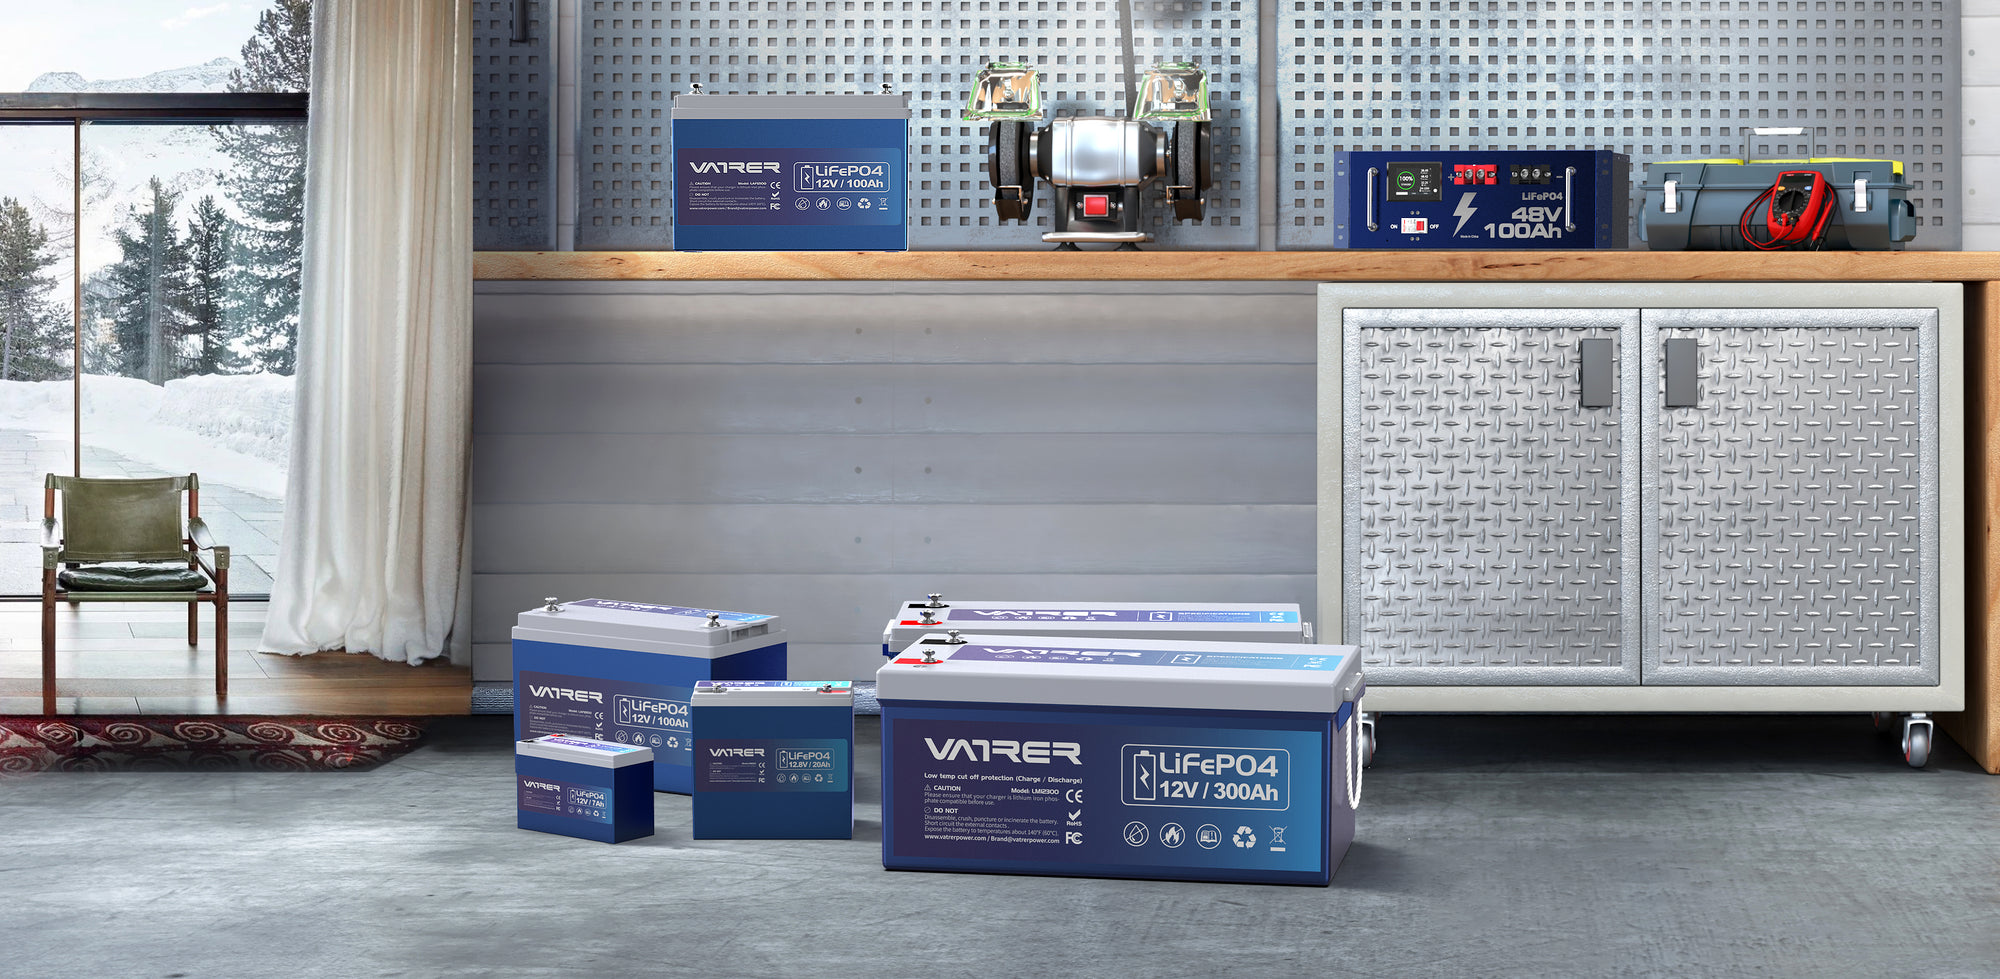 How to Storage Vatrer Power Battery in Winter？